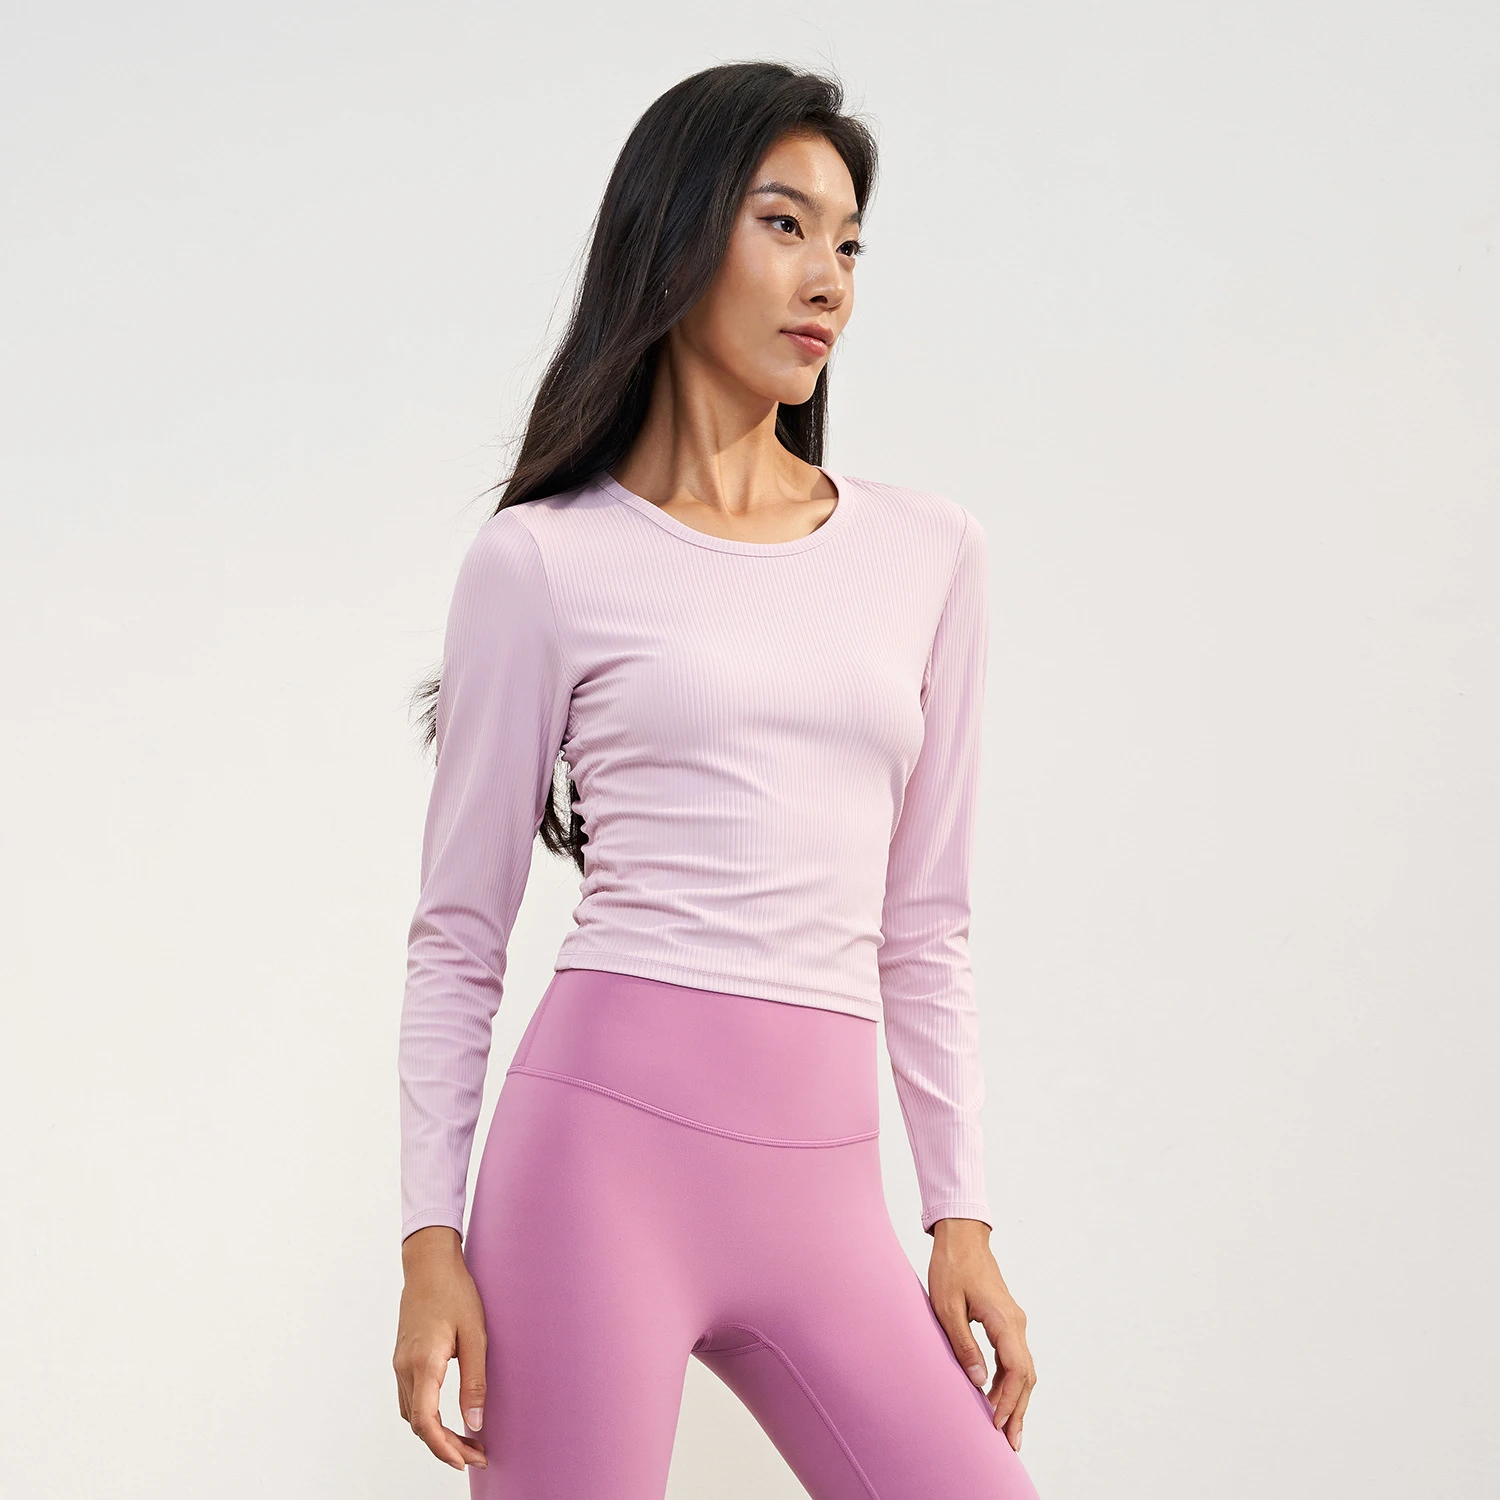 

Wyplosz Yoga Long Sleeve Comfortable Crop Top Rib Gym Shirts For Women Wear Fitness Workout Tight Running Round Neck Nude Spring